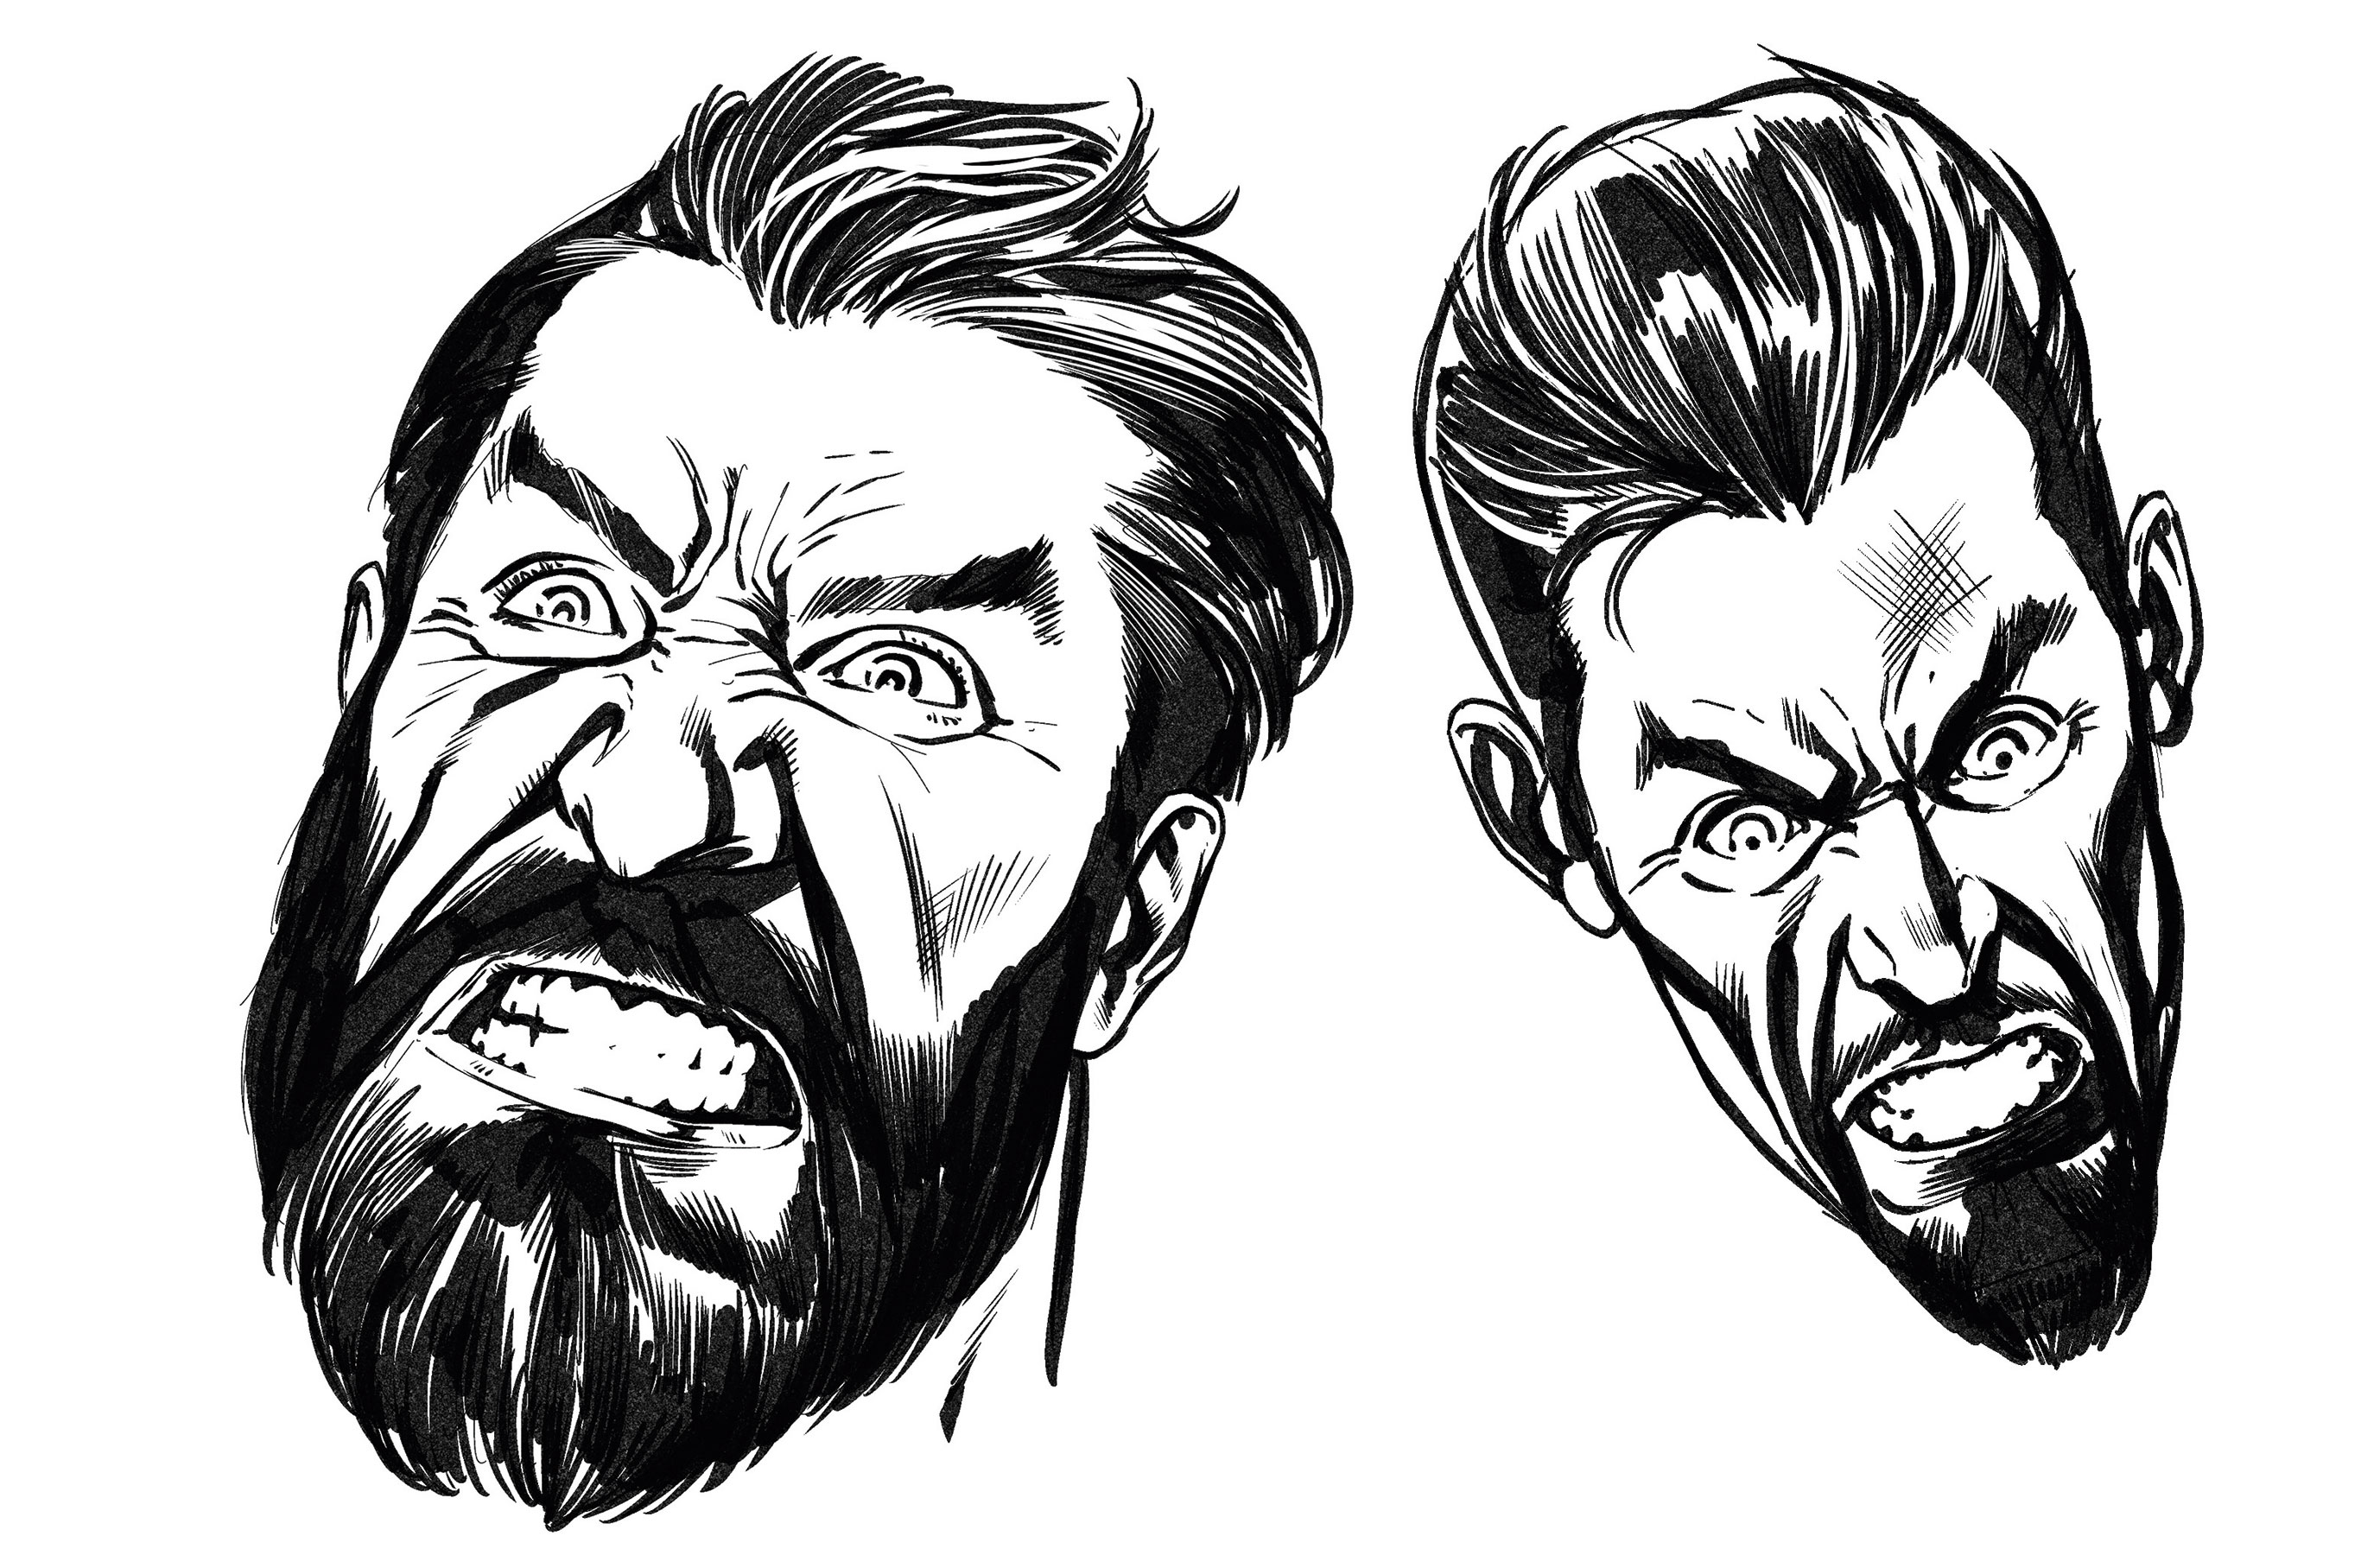 Two drawings of an angry looking man